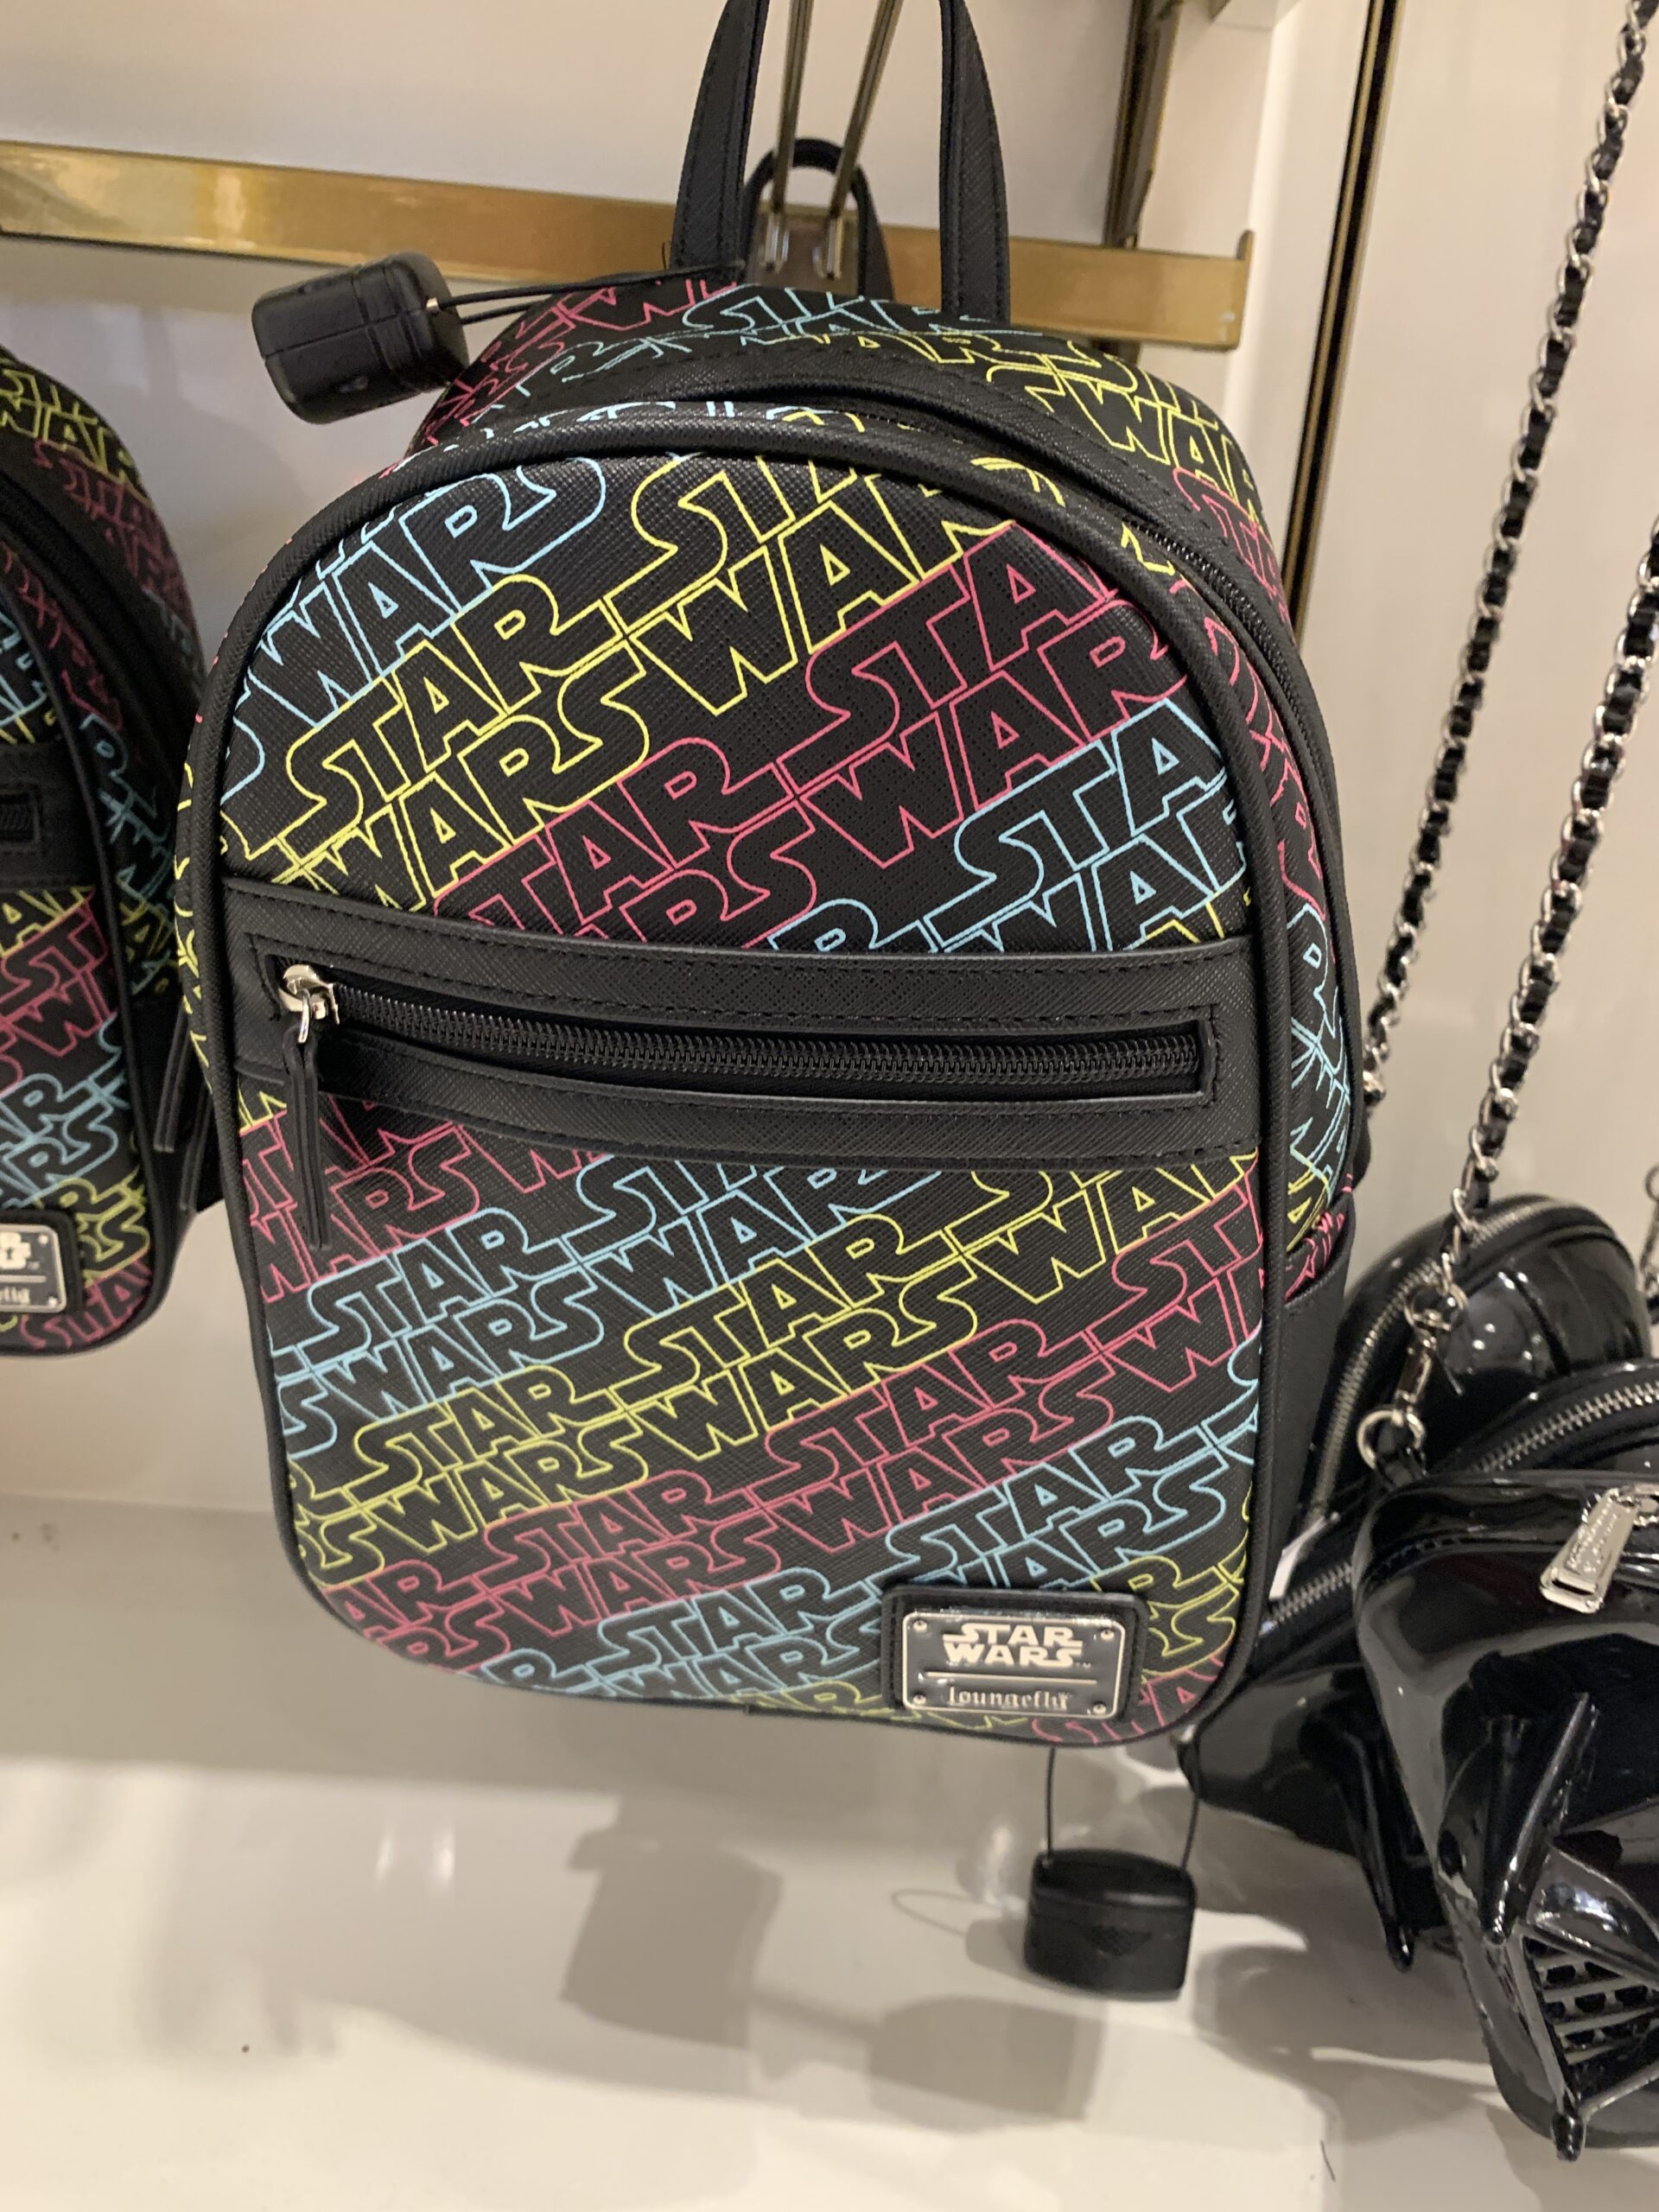 Top Disney-Themed Loungefly Backpacks You Can Find In Disney